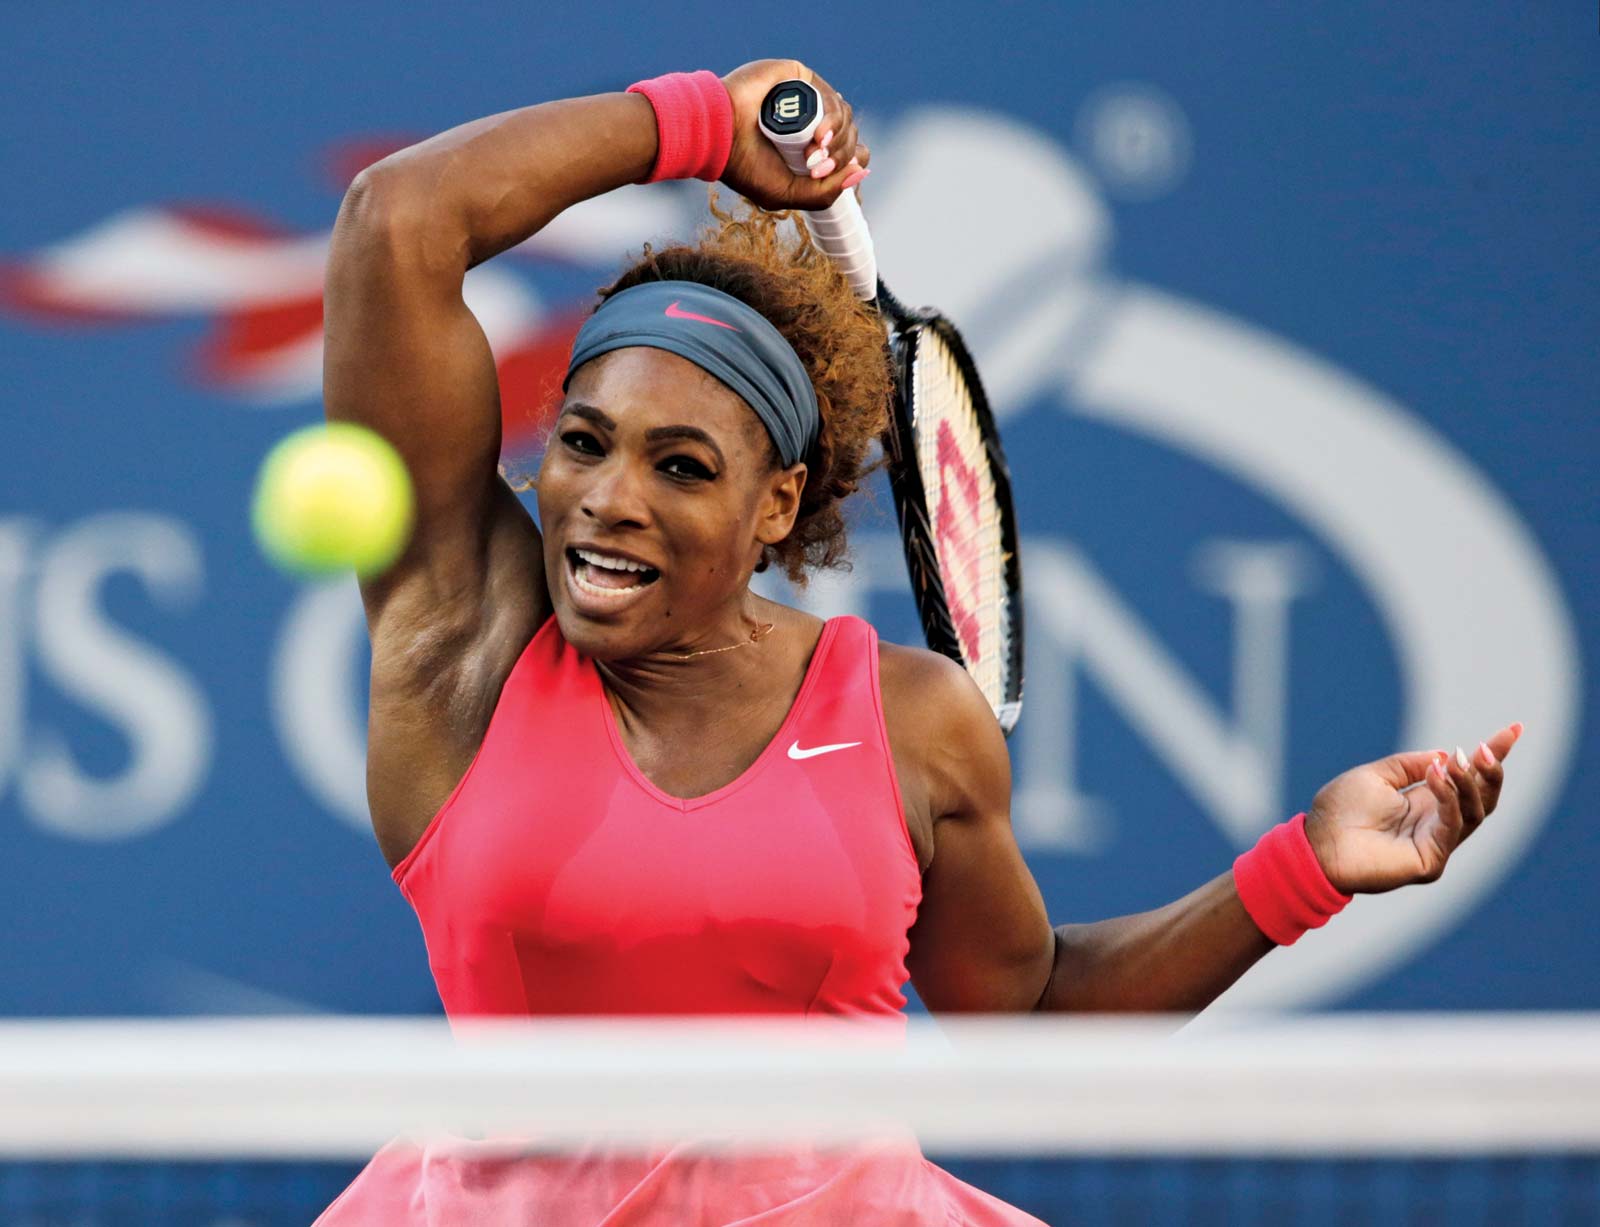 Toronto Open: Serena Williams faces tough draw in first US Open tune-up event, Check out